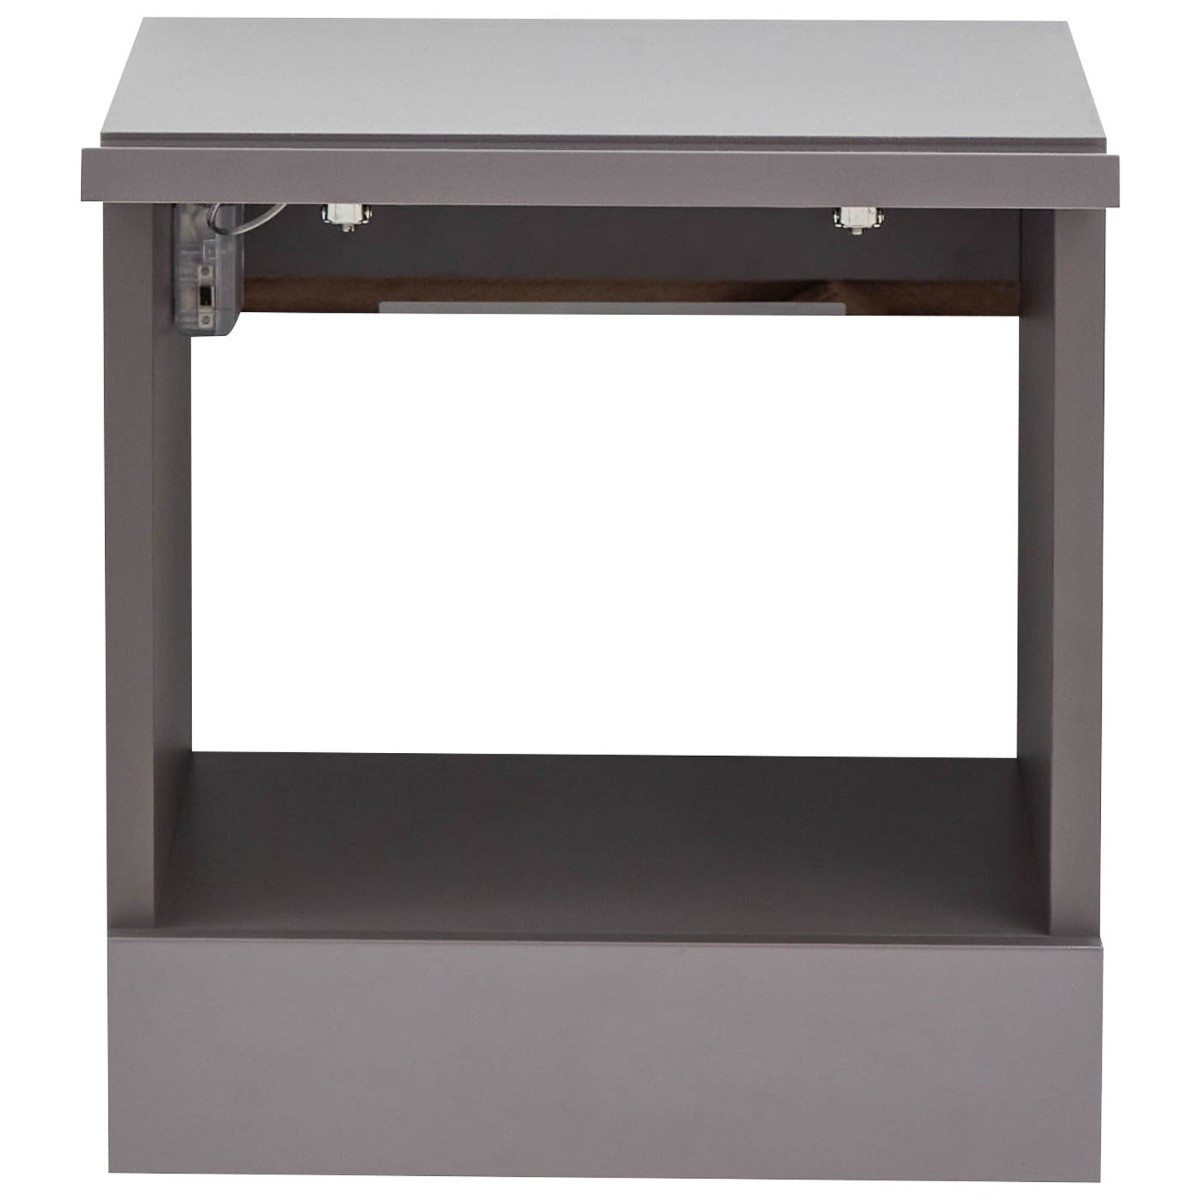 Galicia Pair Of Wall Hanging Bedside Tables - Grey>